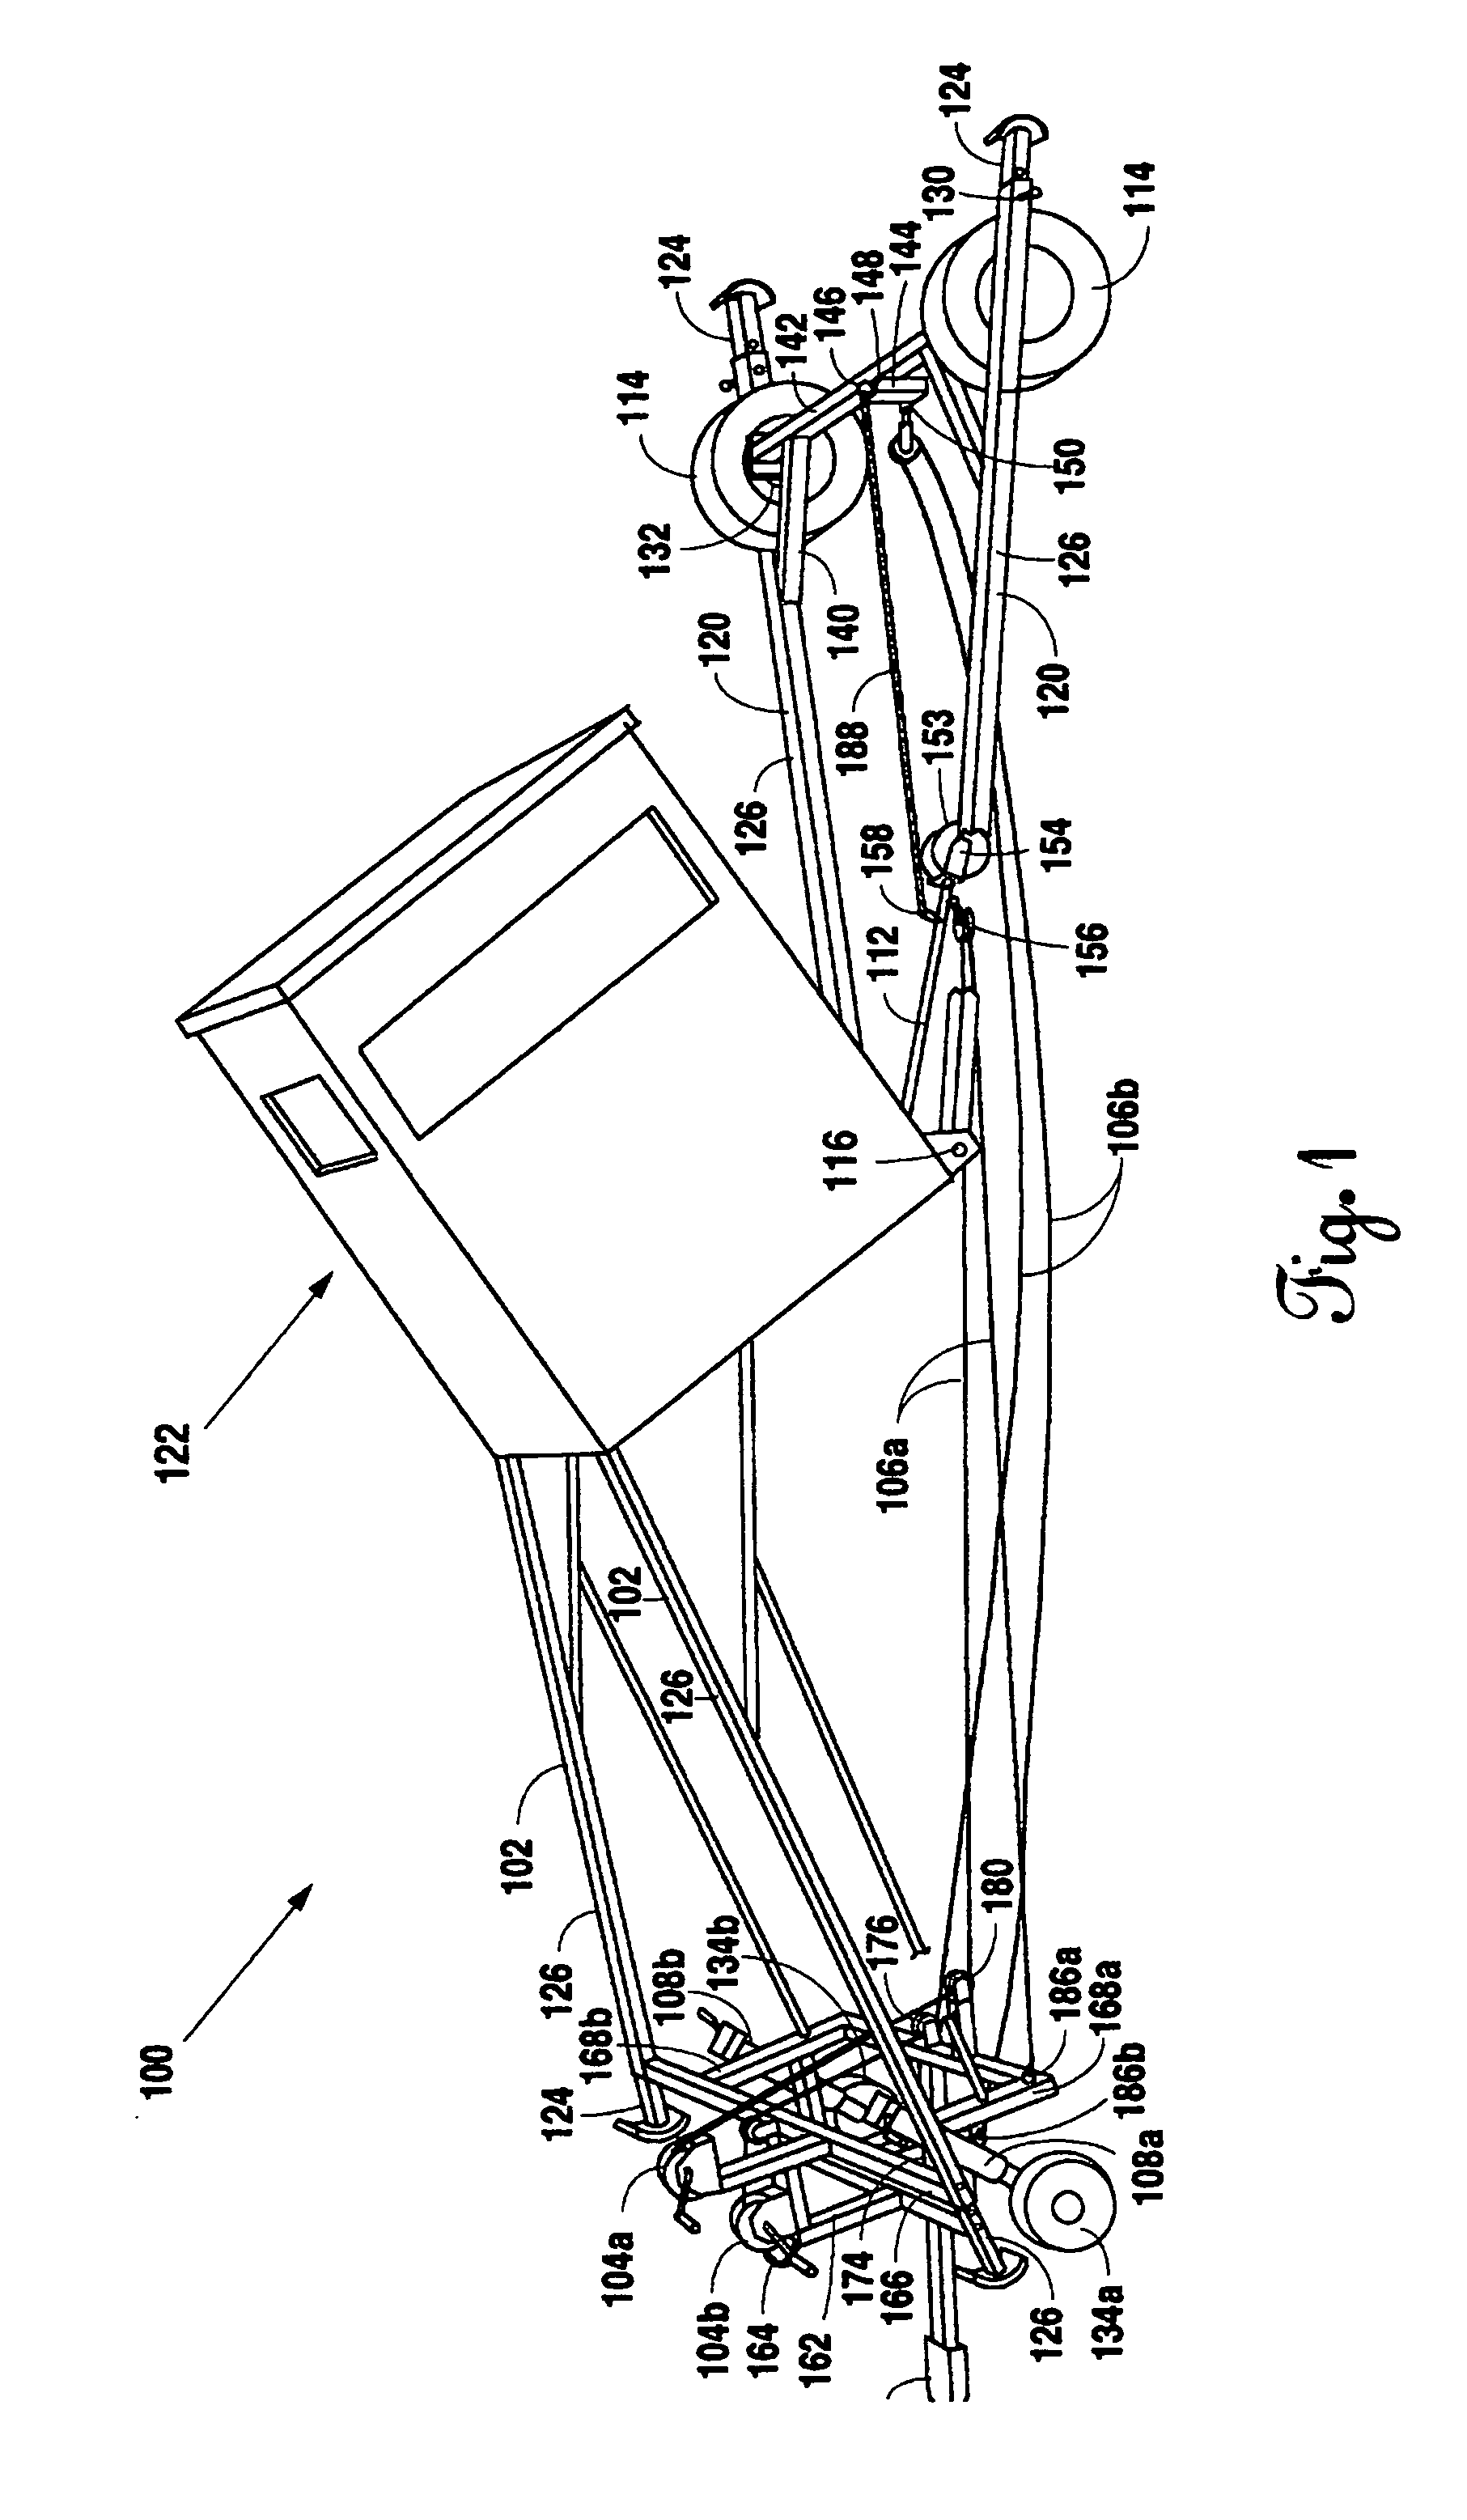 Portable observation tower and system for operation